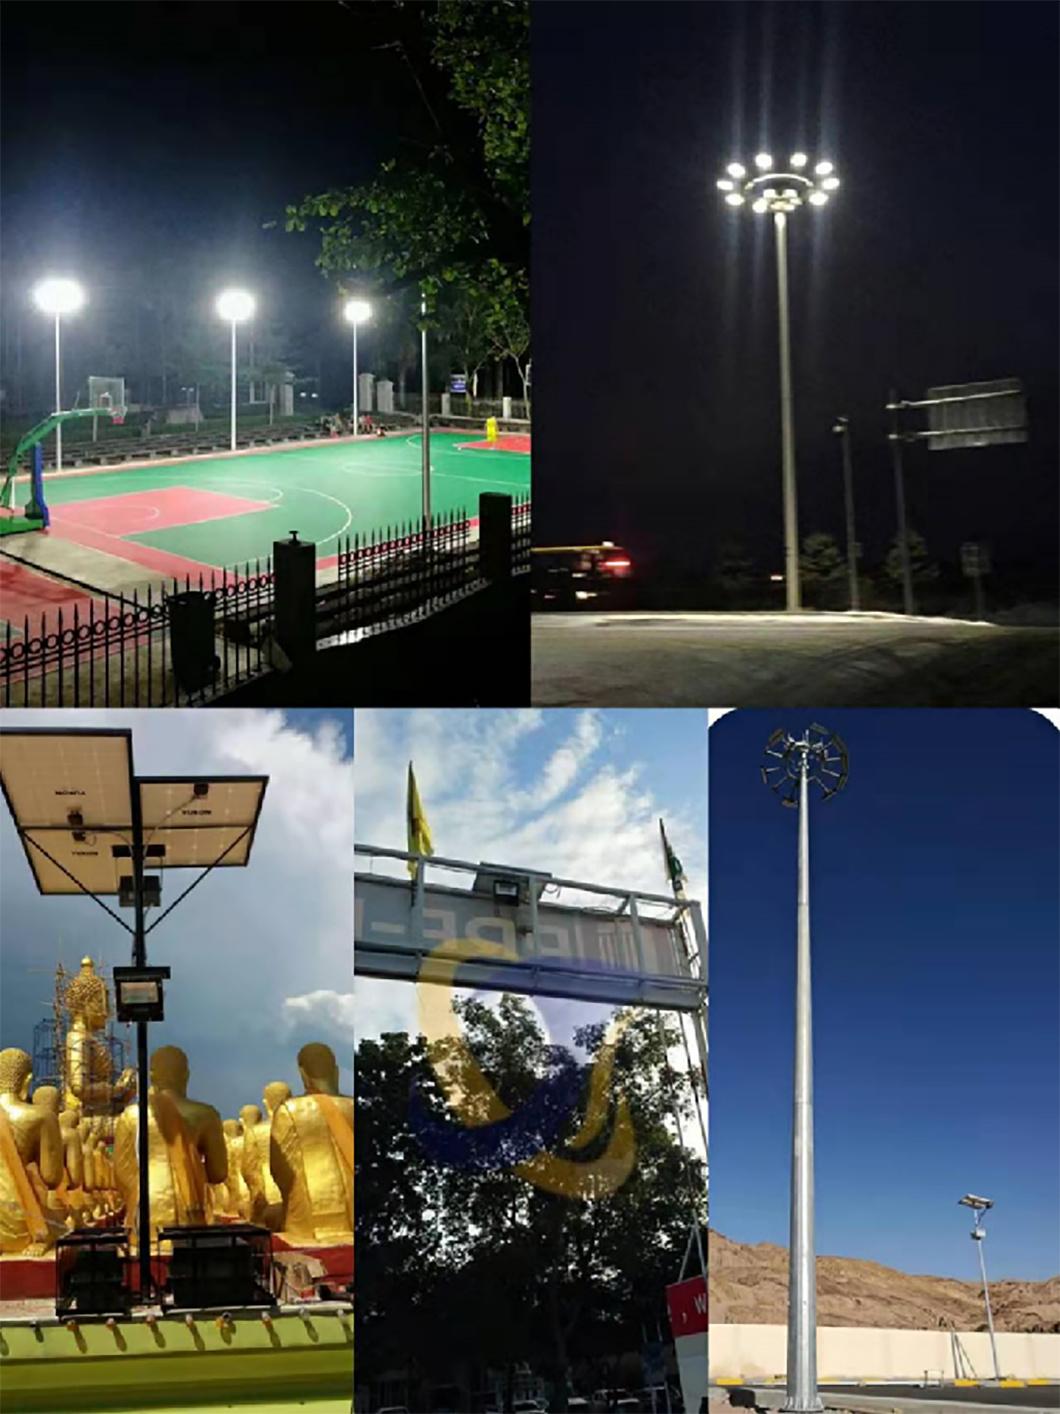 Die Casting Aluminum High Brightness 100W Outdoor LED Flood Light Meanwell Driver >80000 Hours Waterproof IP65 AC96-305V